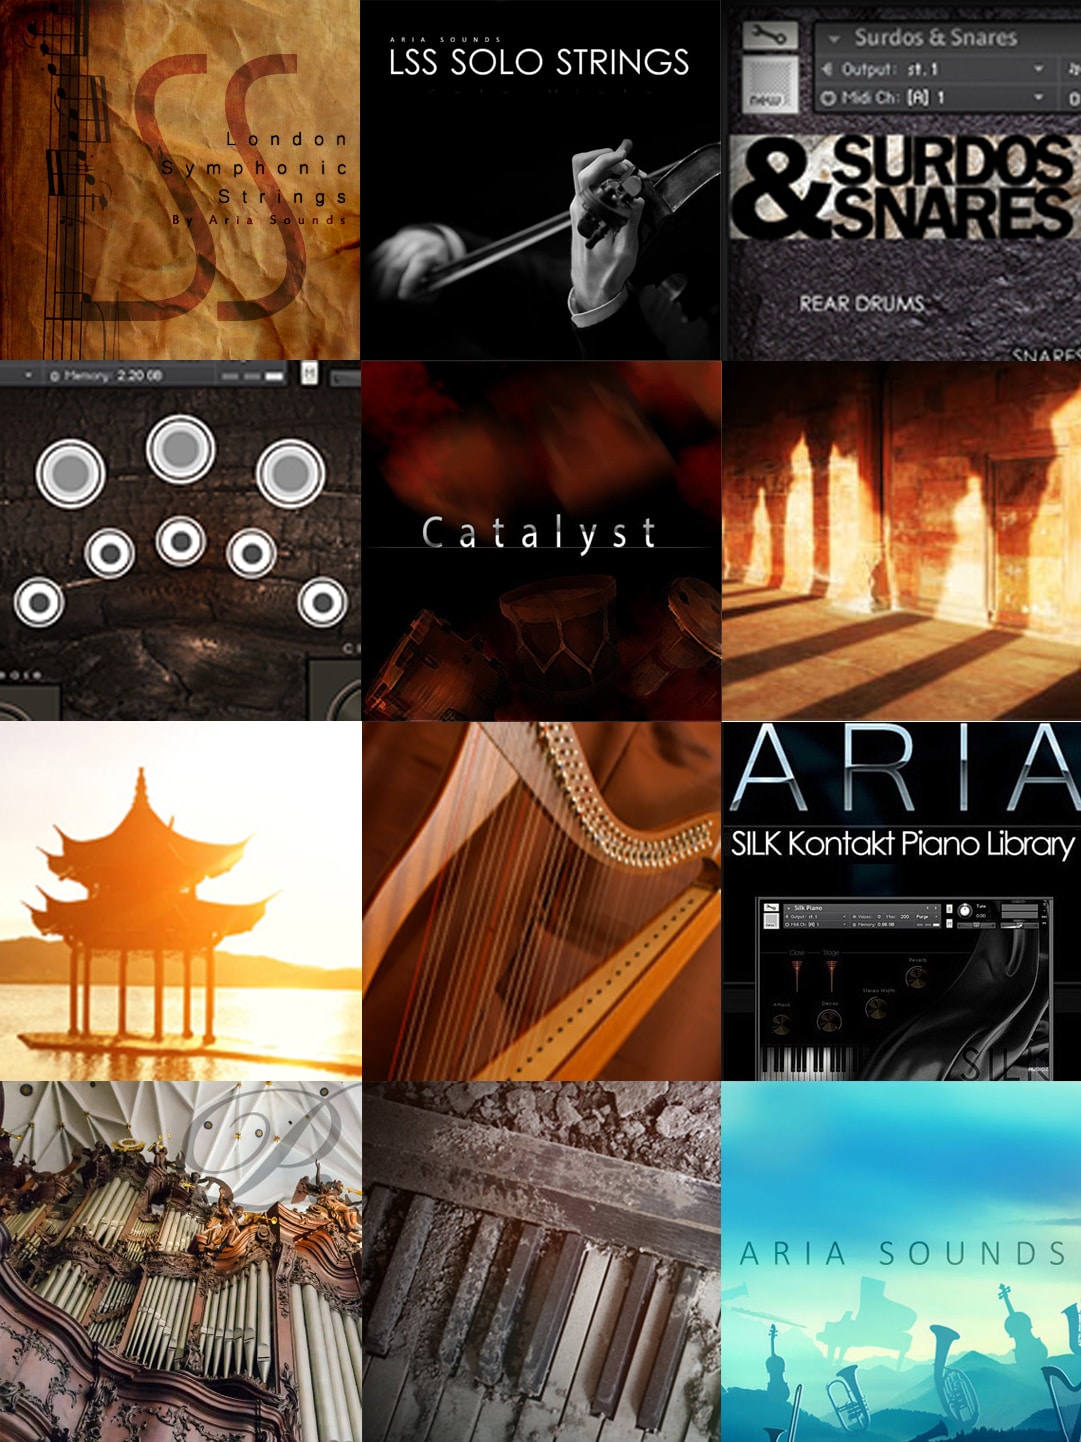 90% off “The Orchestral Bundle” by Aria Sounds